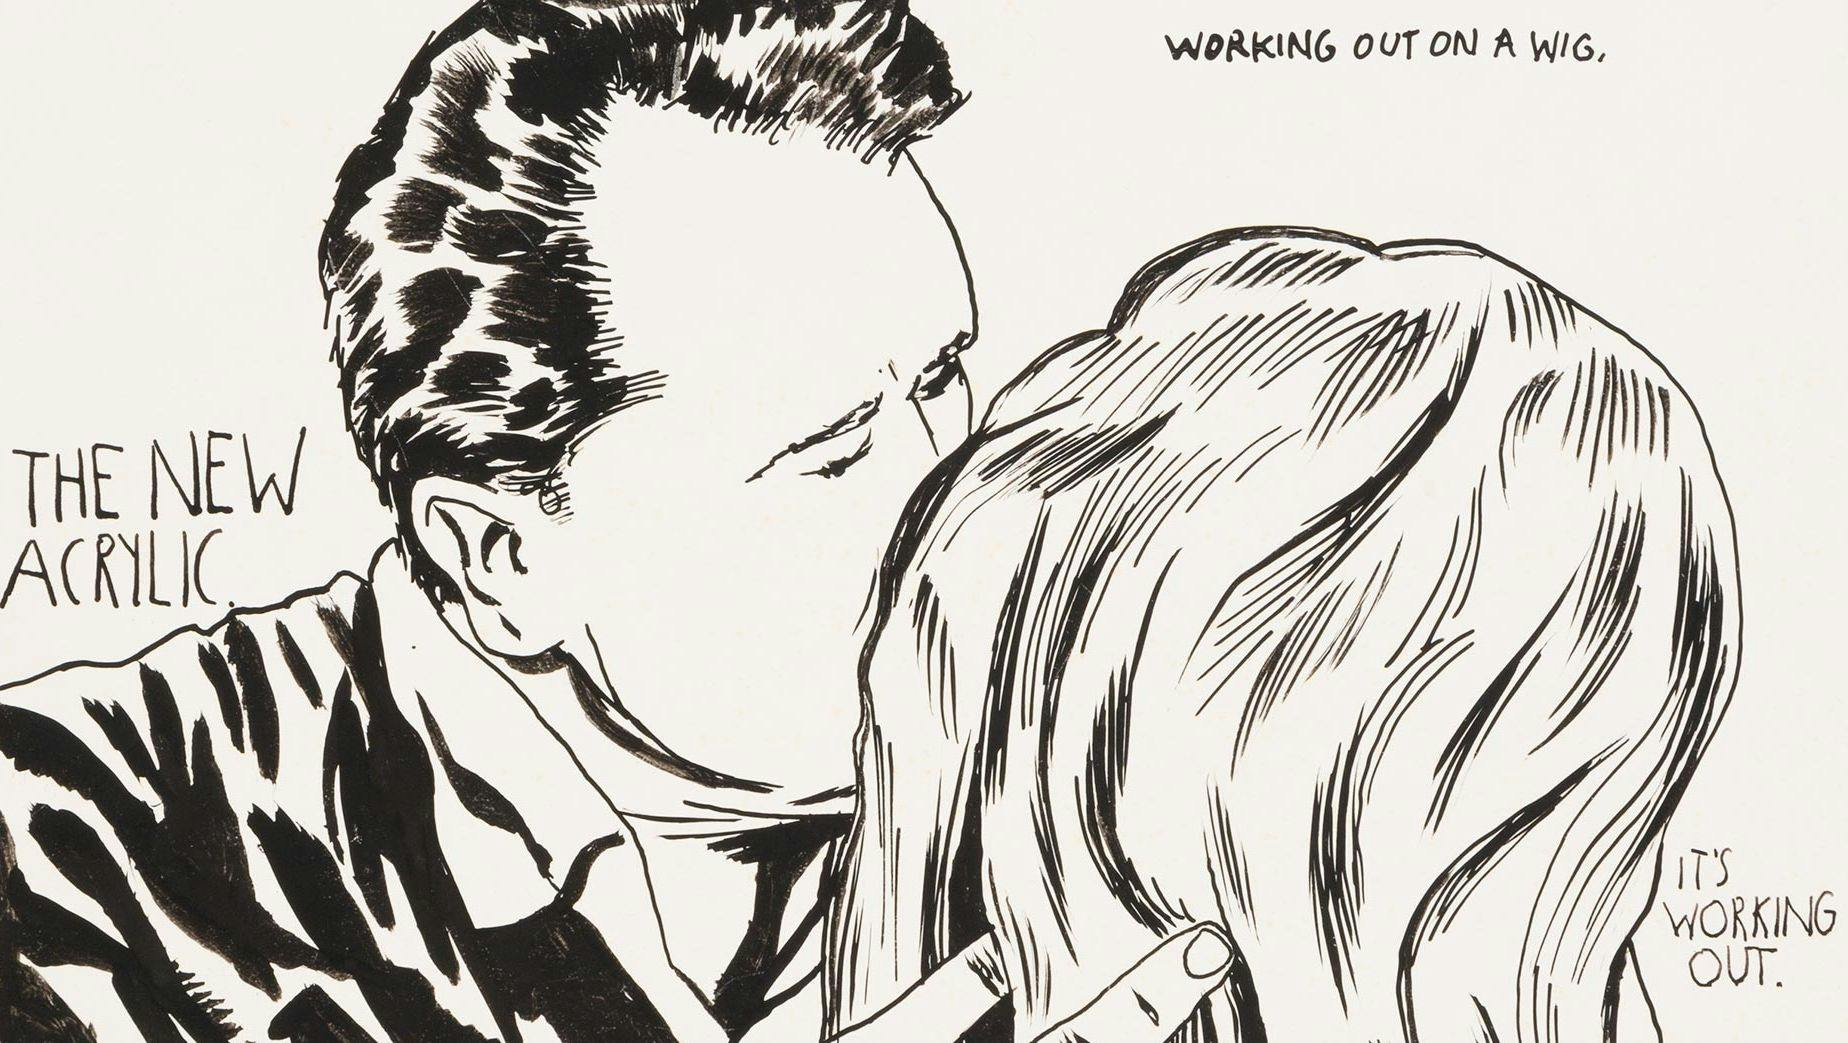 A drawing by Raymond Pettibon titled, No Title (The new acrylic...), dated 1984.